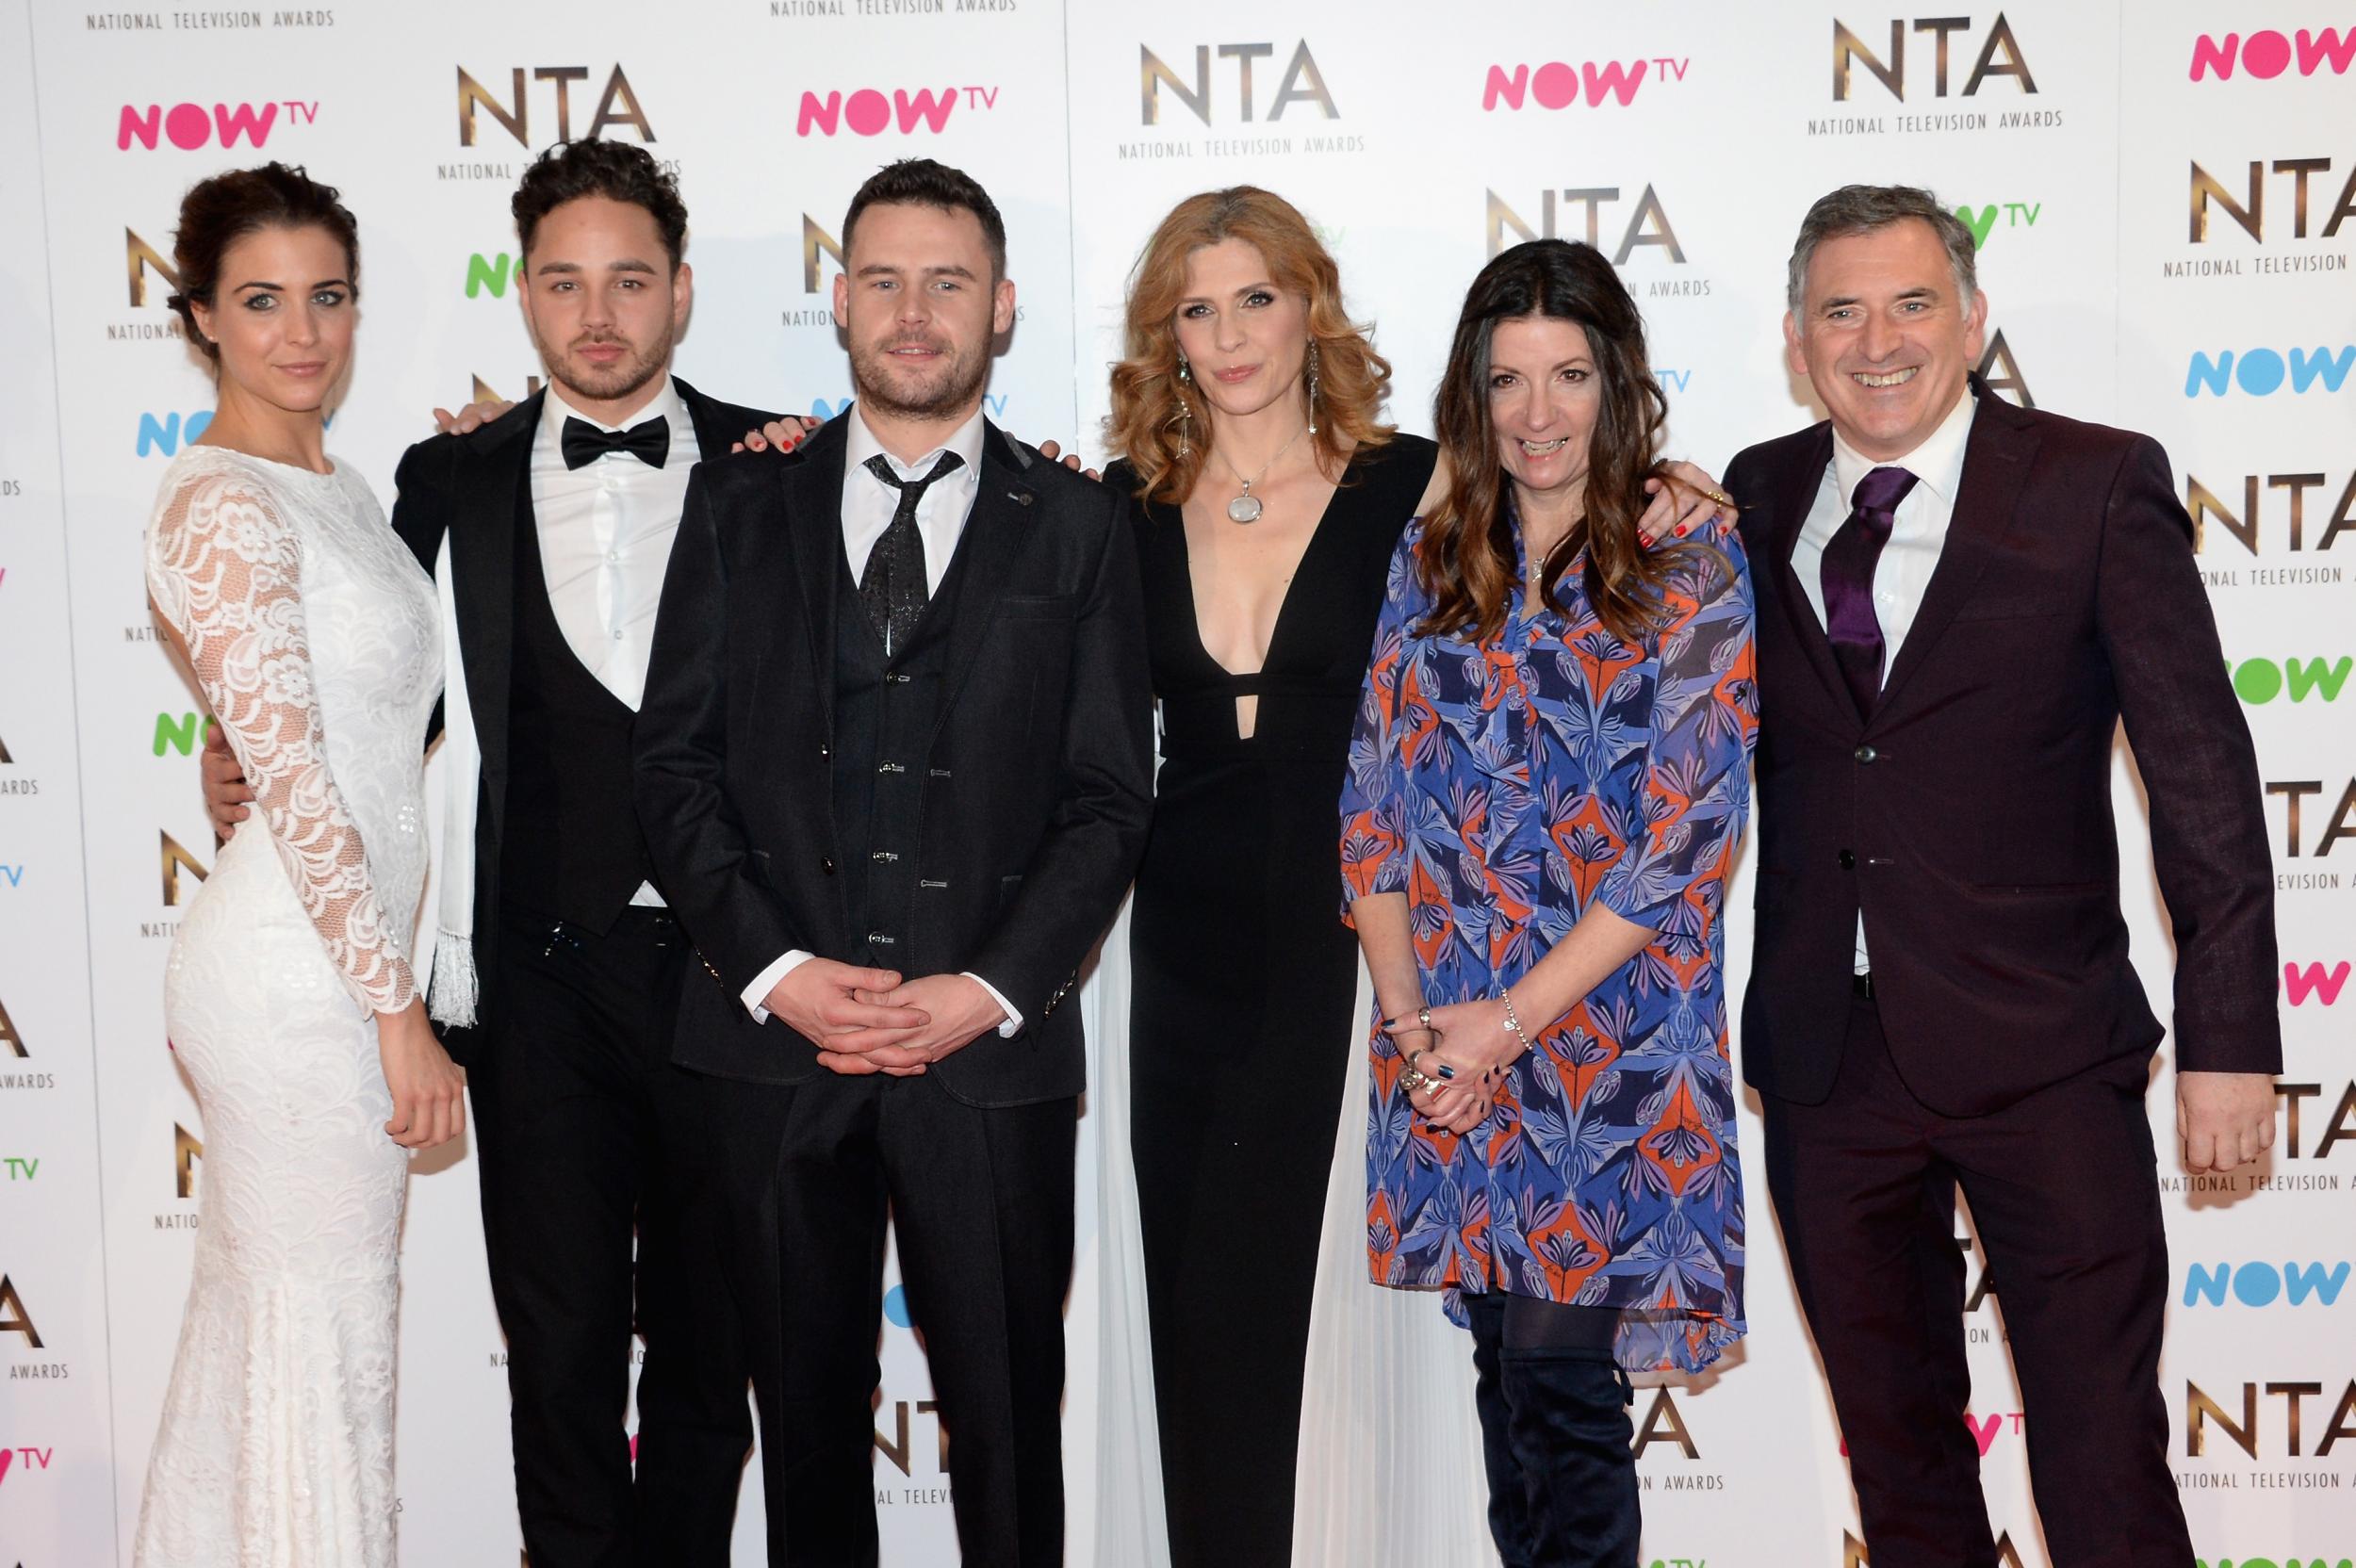 The cast of Emmerdale at the National Television Awards at The O2 Arena on January 25, 2017